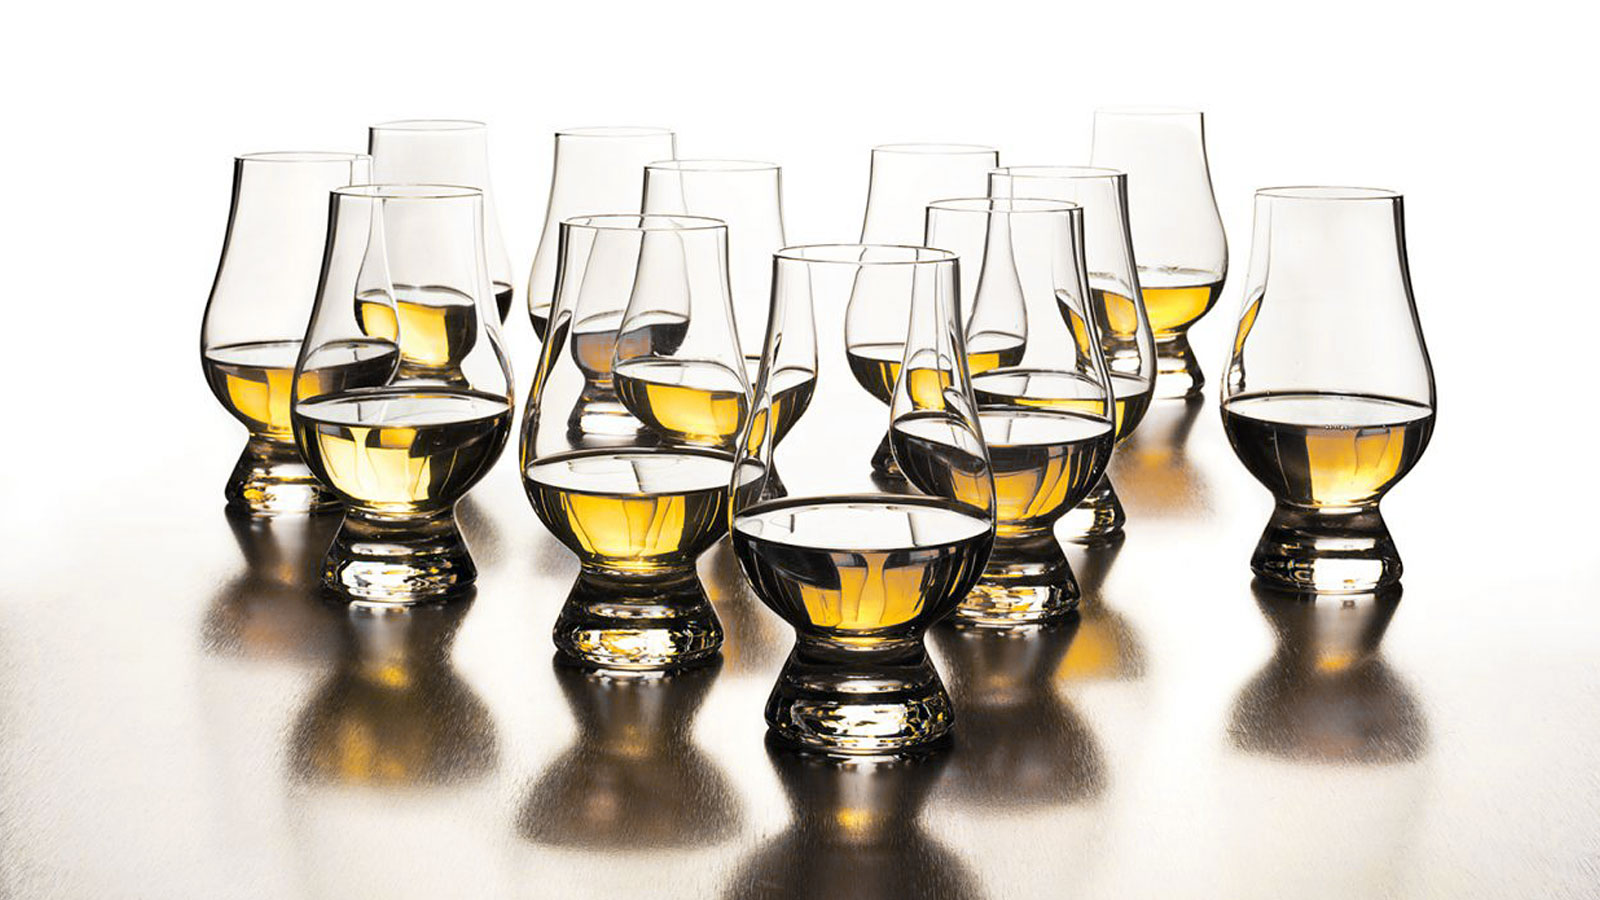 Where to buy | Top 10 Whiskys for Beginners – by Daniel and Rex from the Whisk(e)y Vault